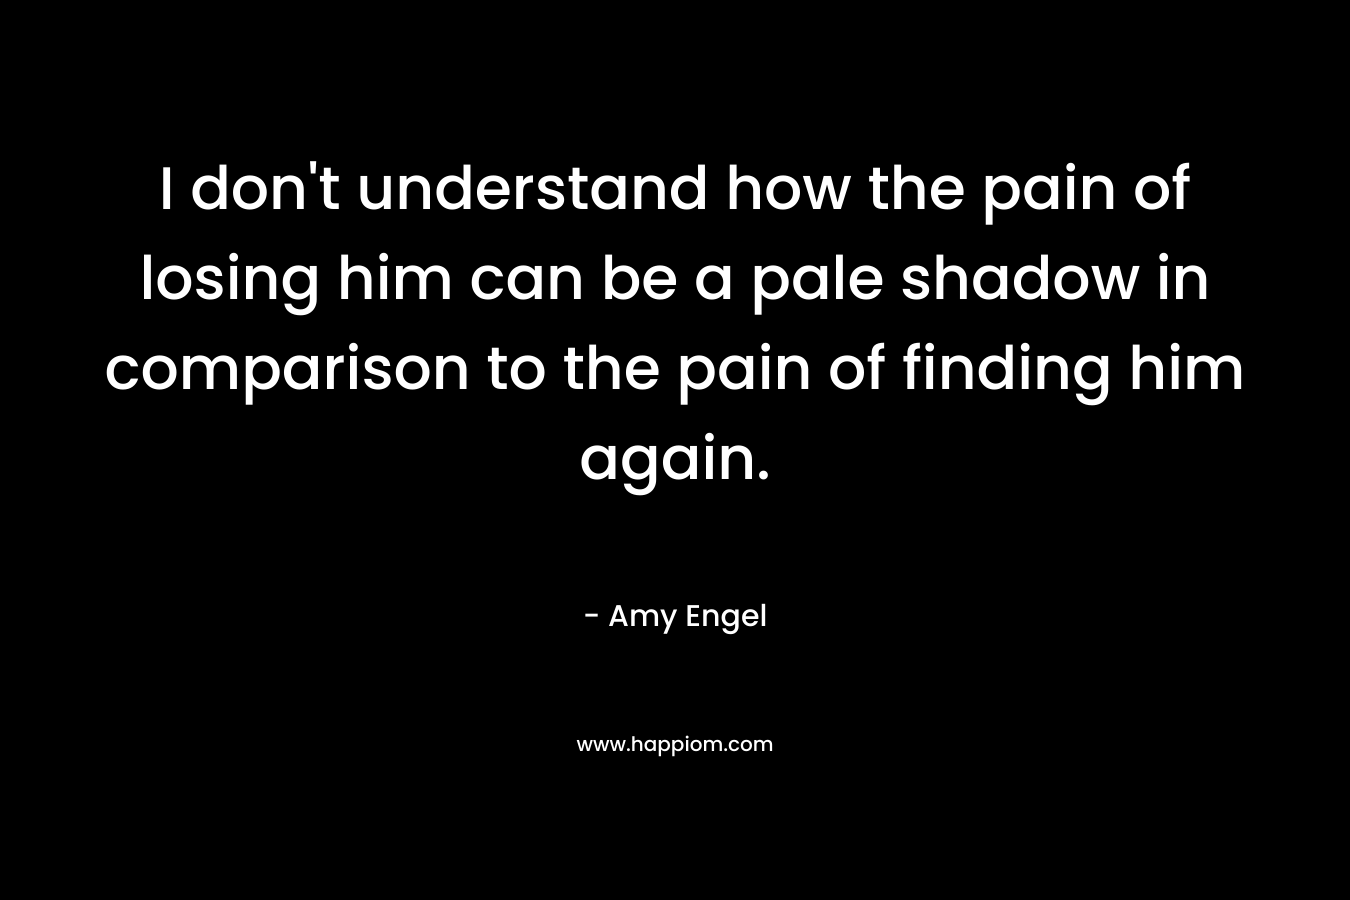 I don’t understand how the pain of losing him can be a pale shadow in comparison to the pain of finding him again. – Amy Engel